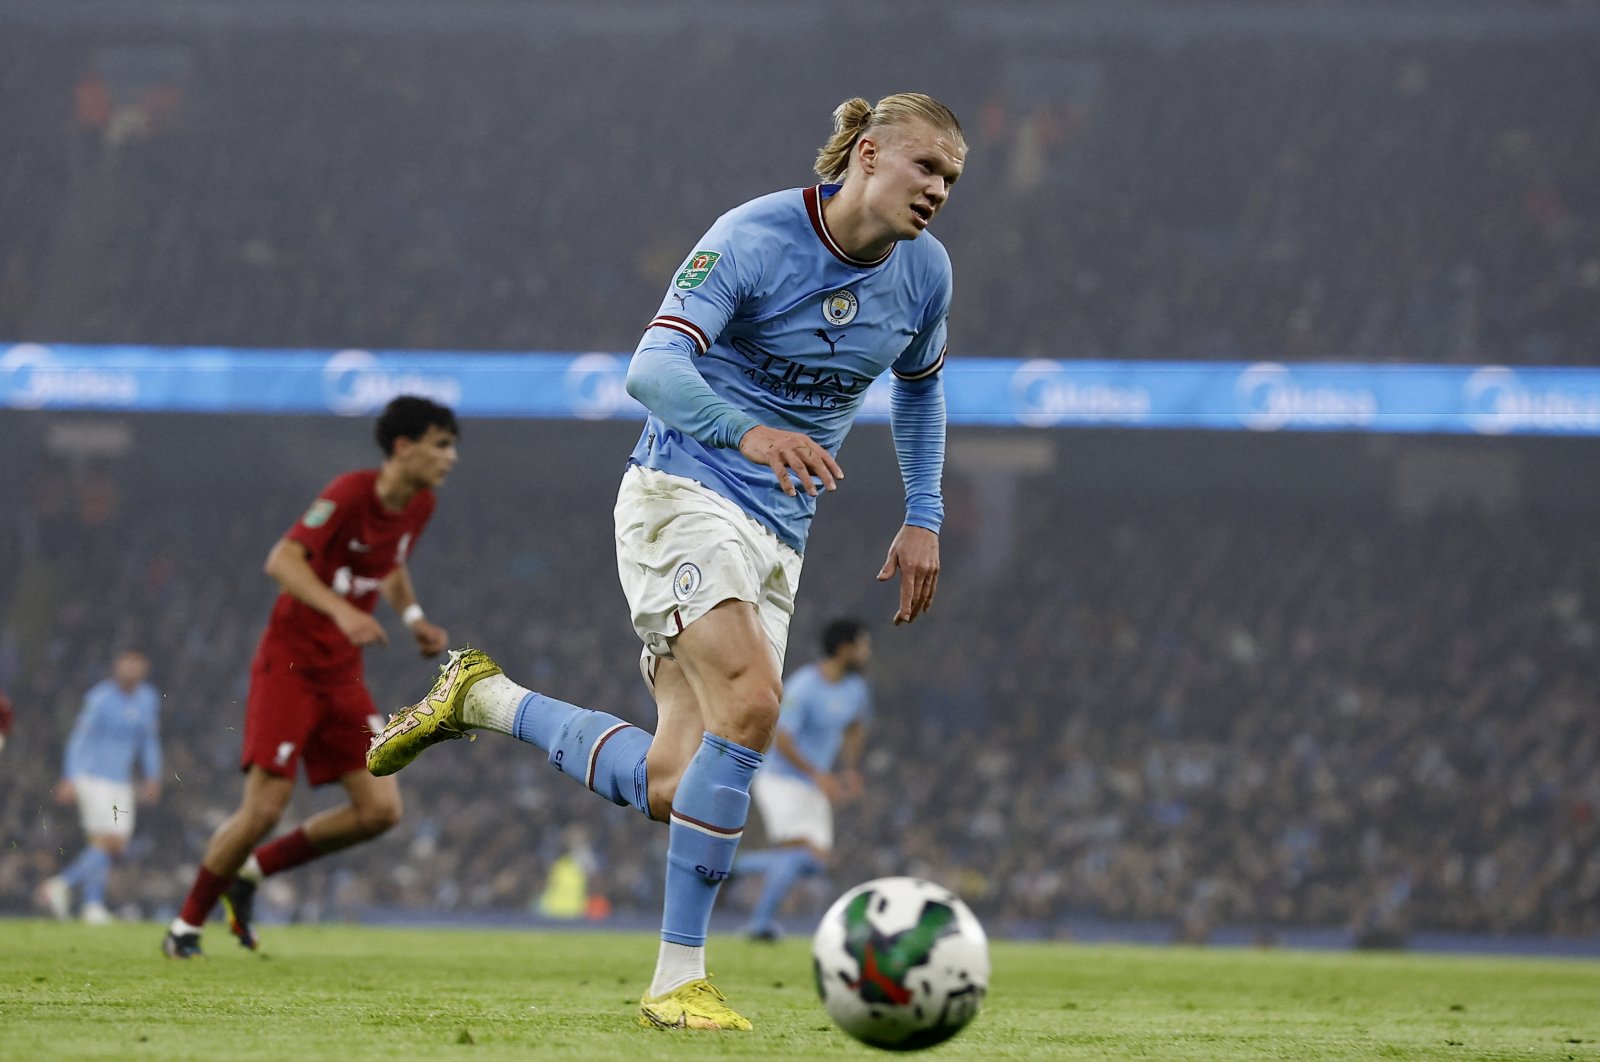 Man City gallop to 3-2 triumph over Liverpool in League Cup tie